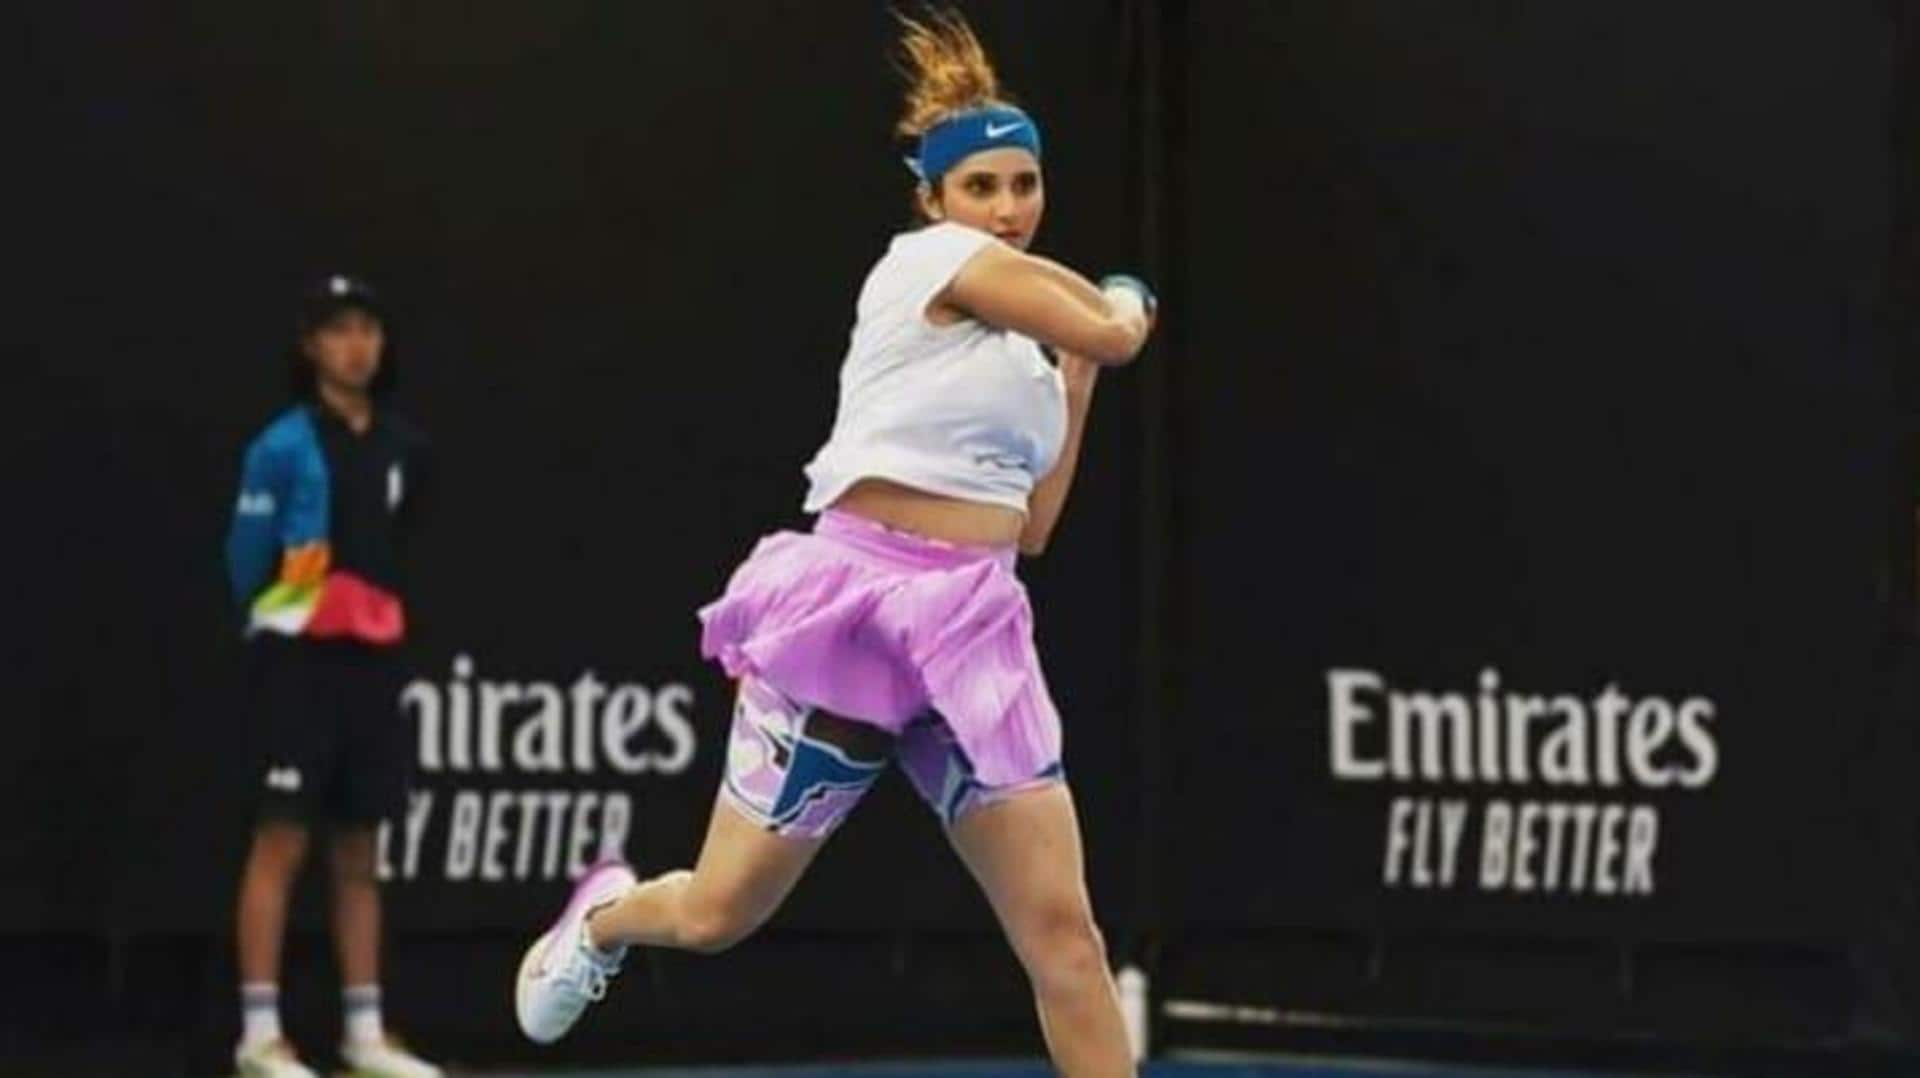 Sania Mirza concludes her illustrious tennis career: Decoding her achievements